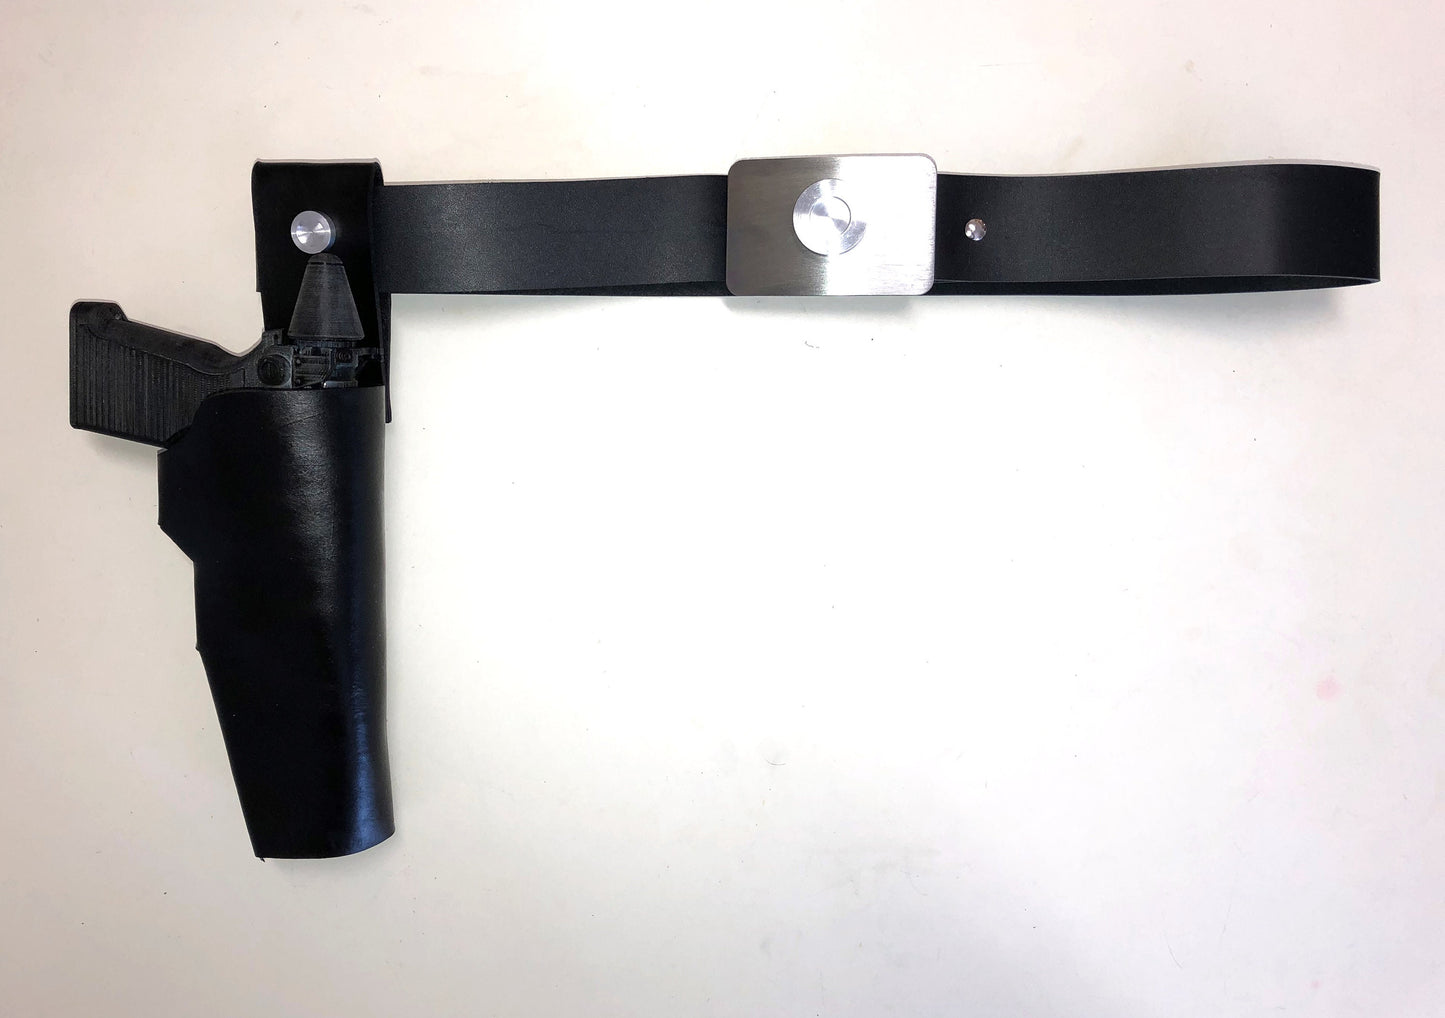 Grand Admiral Thrawn Belt Rig with officer buckle and Holster